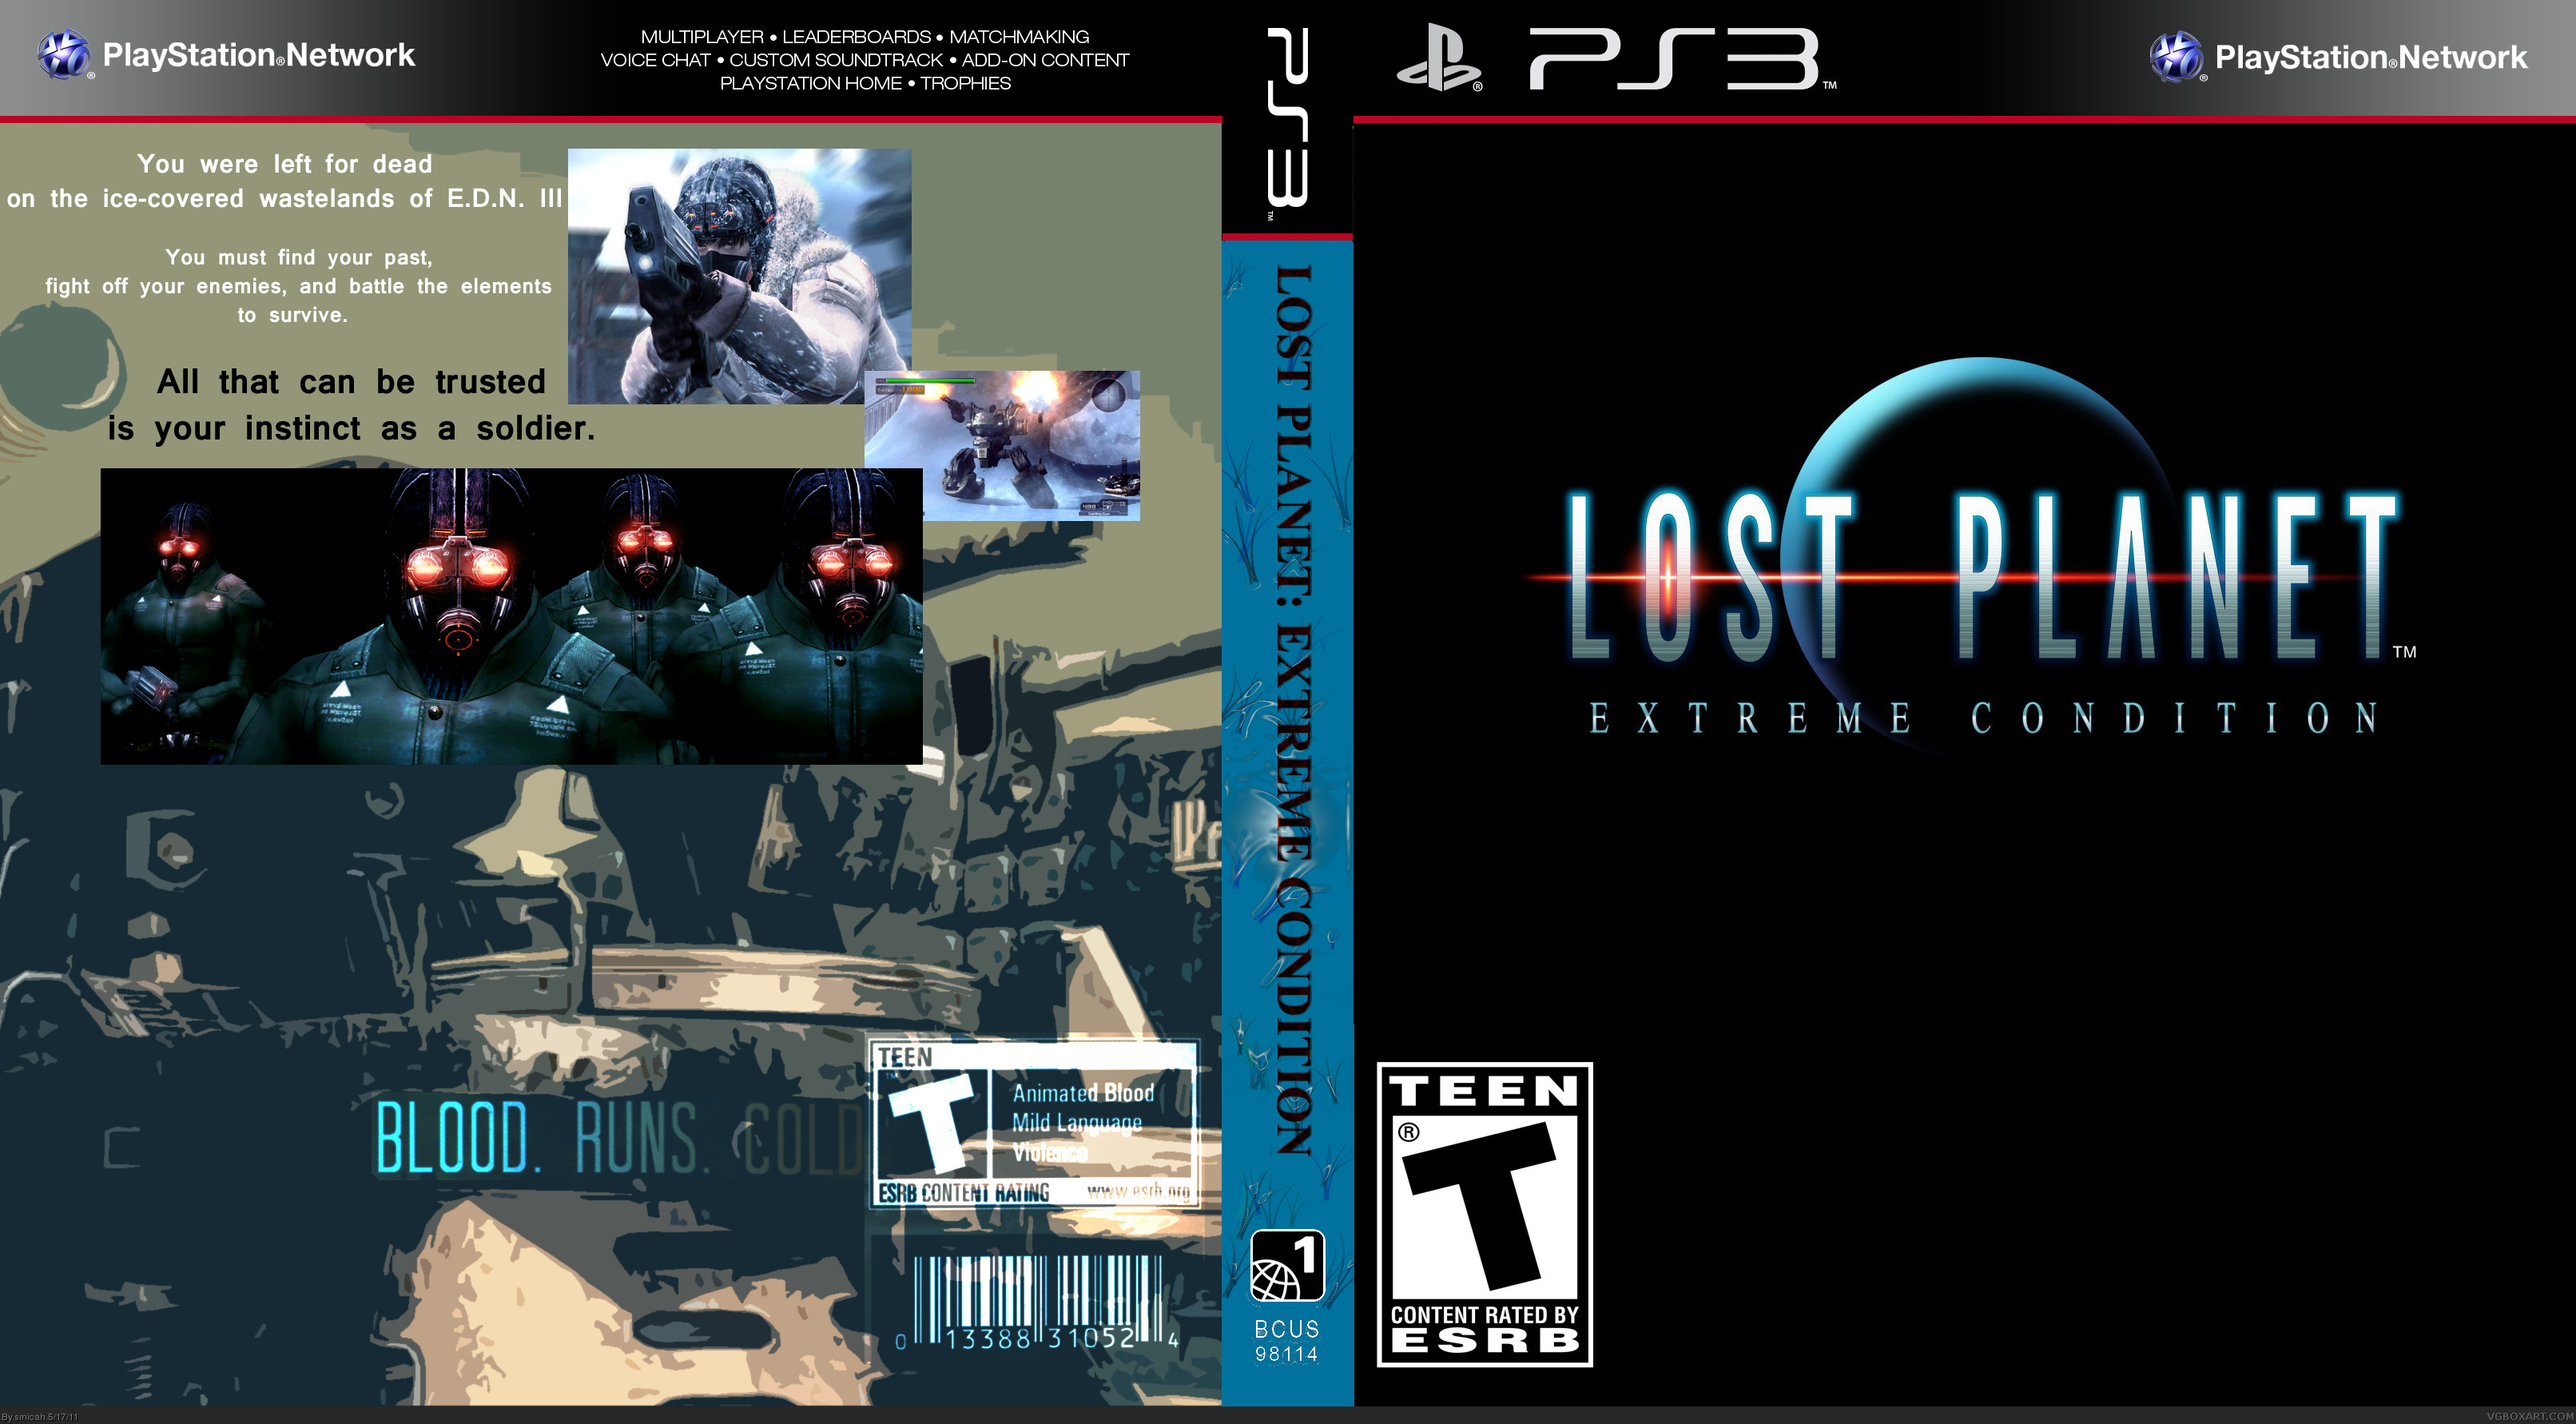 Lost Planet: Extreme Condition box cover